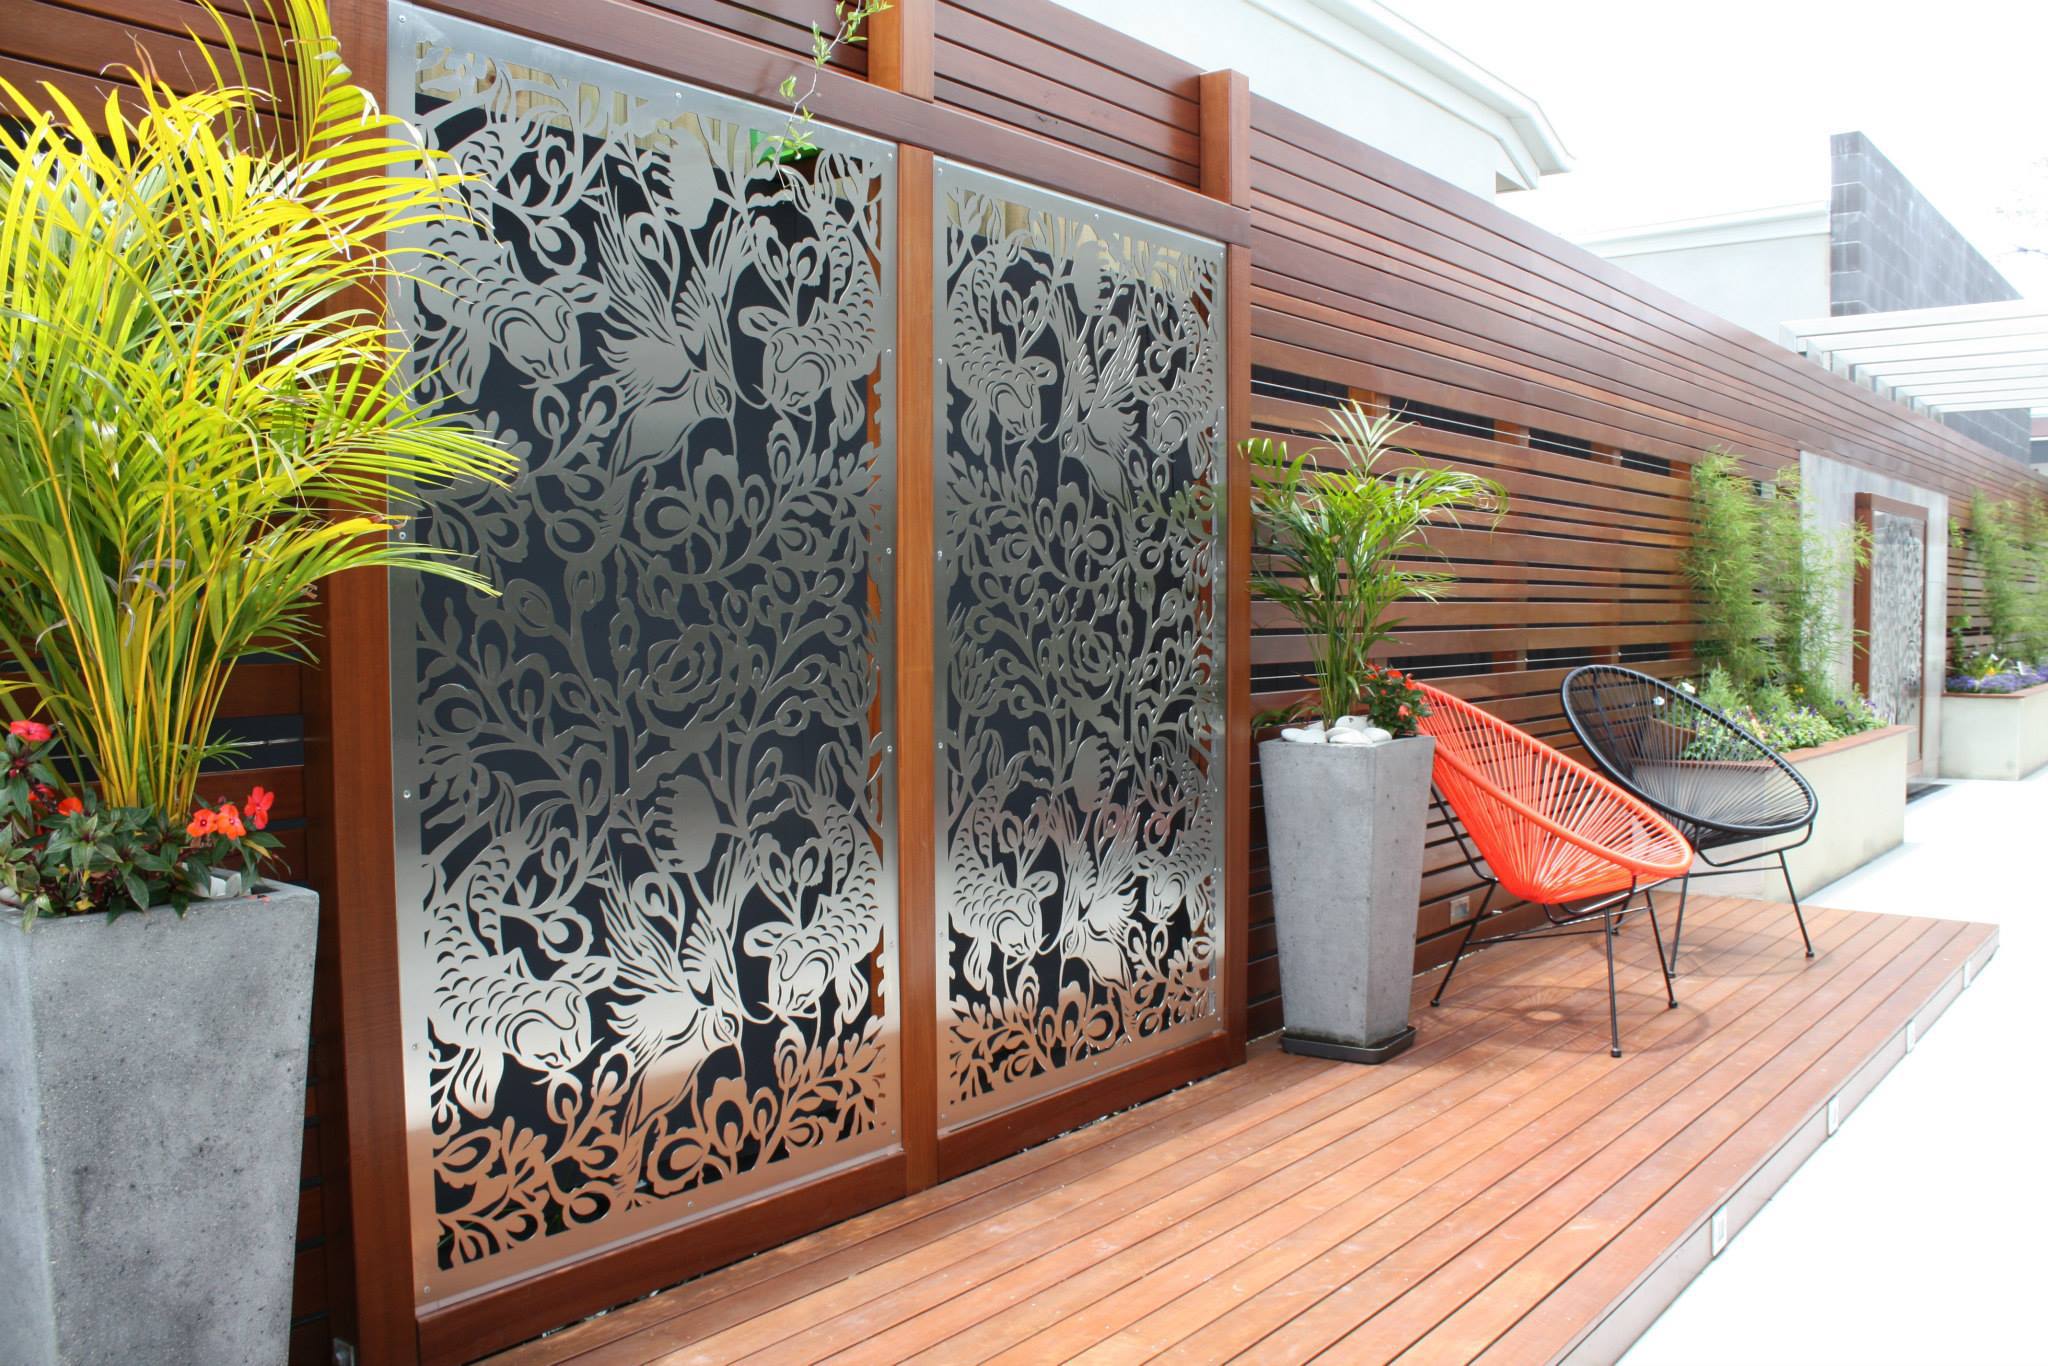 Install Outdoor Screens and Enjoy Privacy